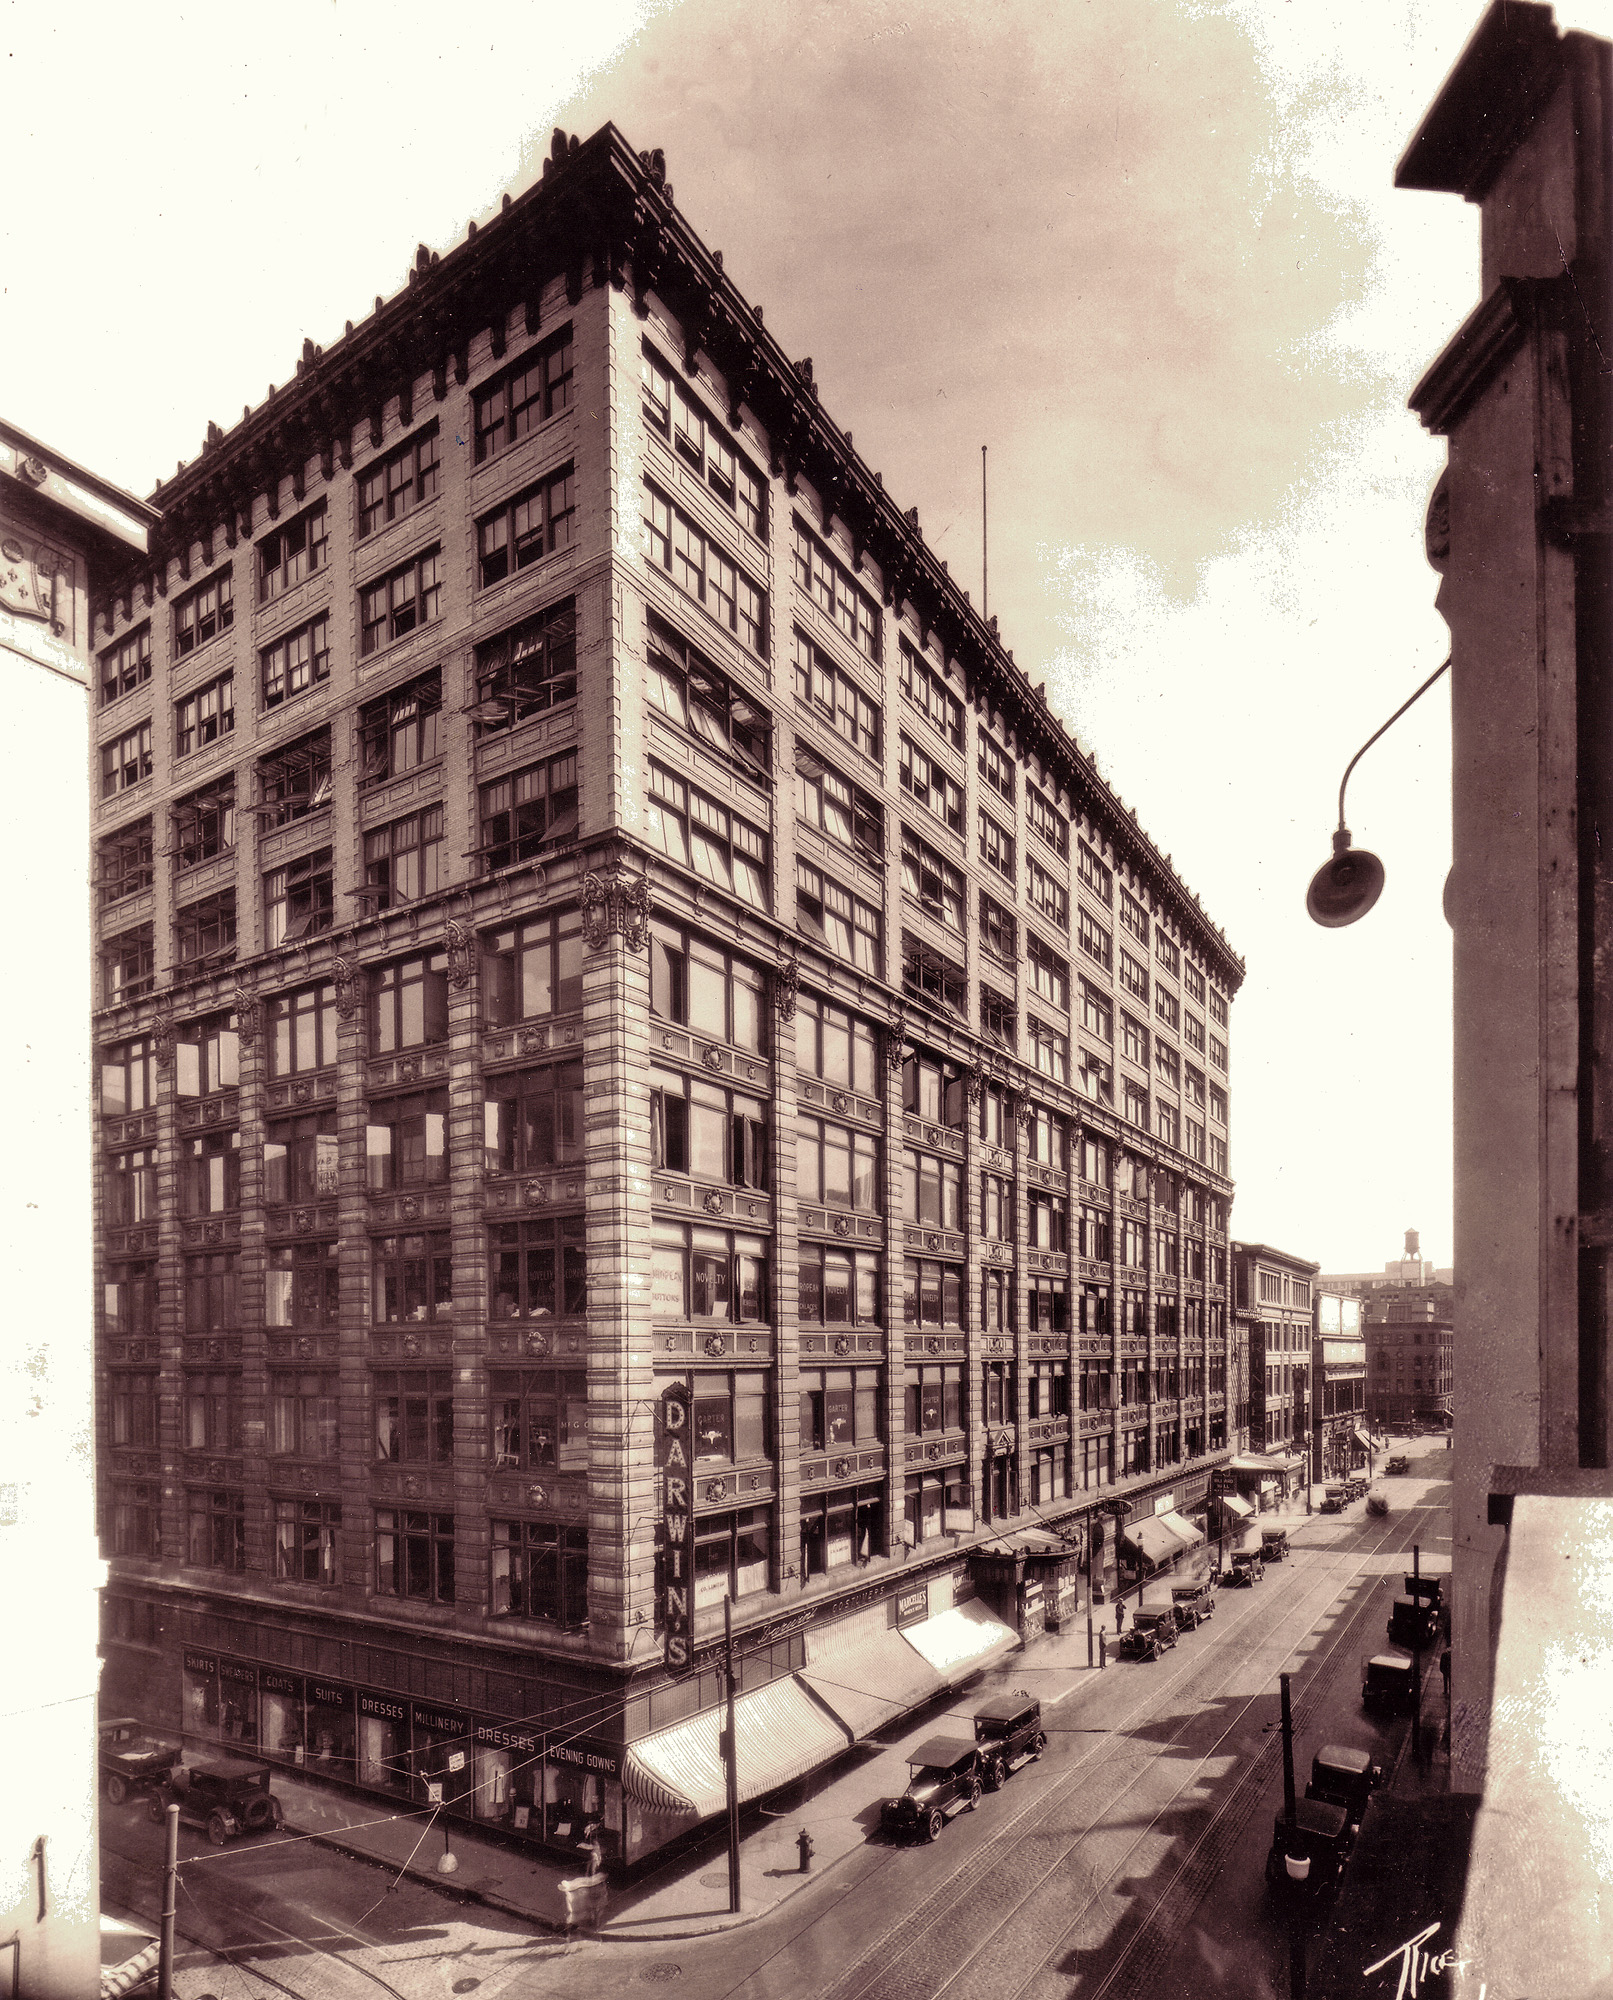 The Jacob Building was built in 1910 on the corner of St. Catherine West and St. Alexander Streets in downtown Montreal, Quebec. I am a property administrator in this building and recently was cleaning some files and found this pic. It was shot in 1929 by well-known photographer of the time James Rice. View full size.